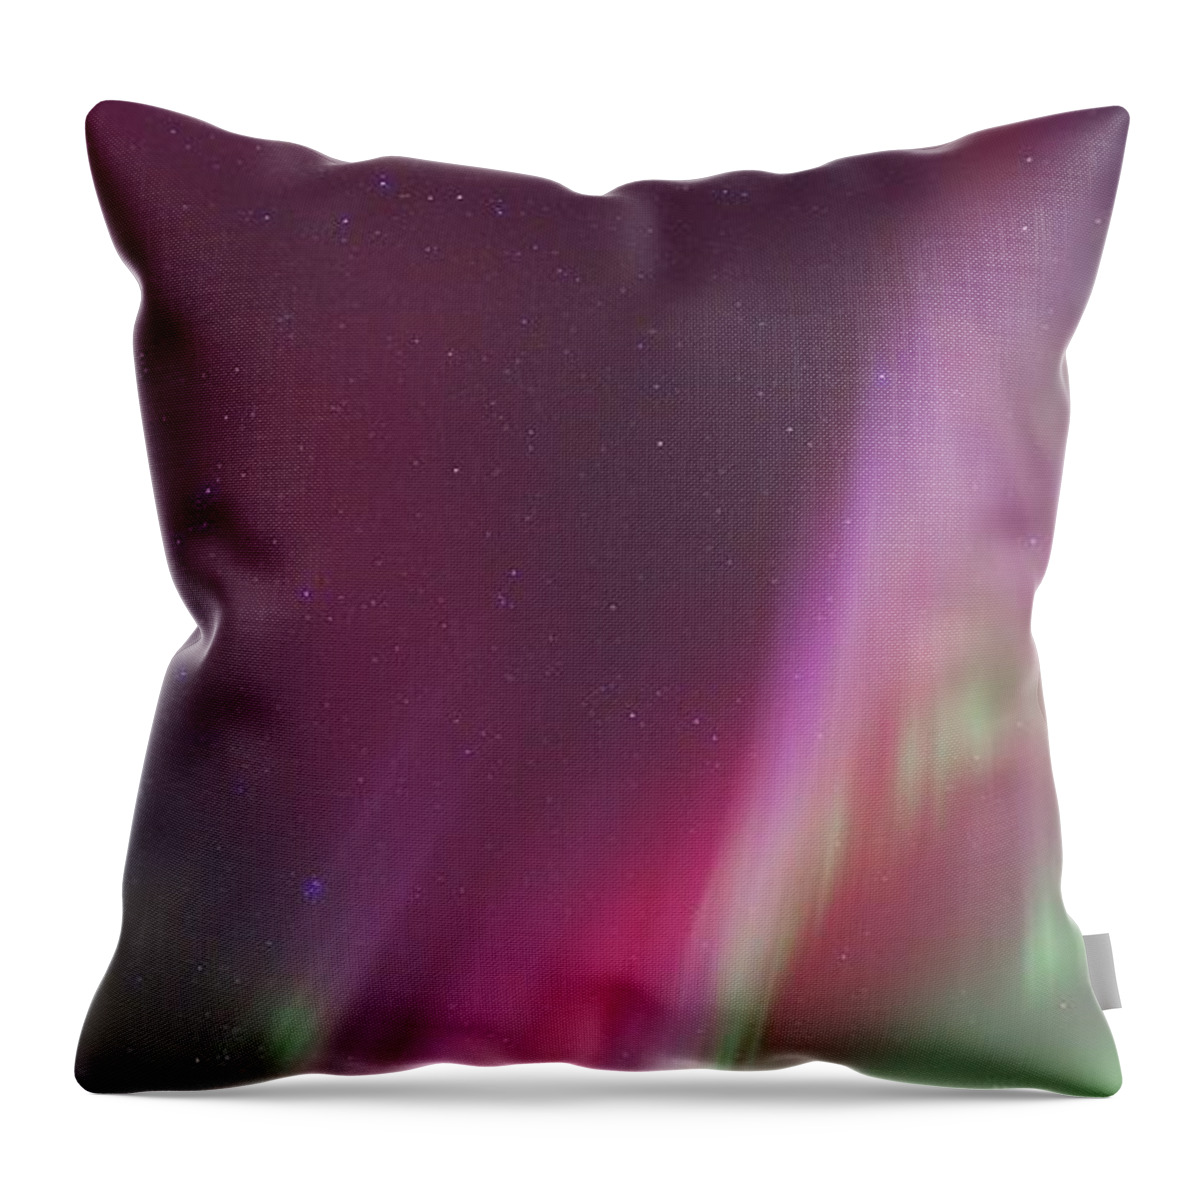 Tranquility Throw Pillow featuring the photograph Northern Lights #4 by Design Pics/carson Ganci